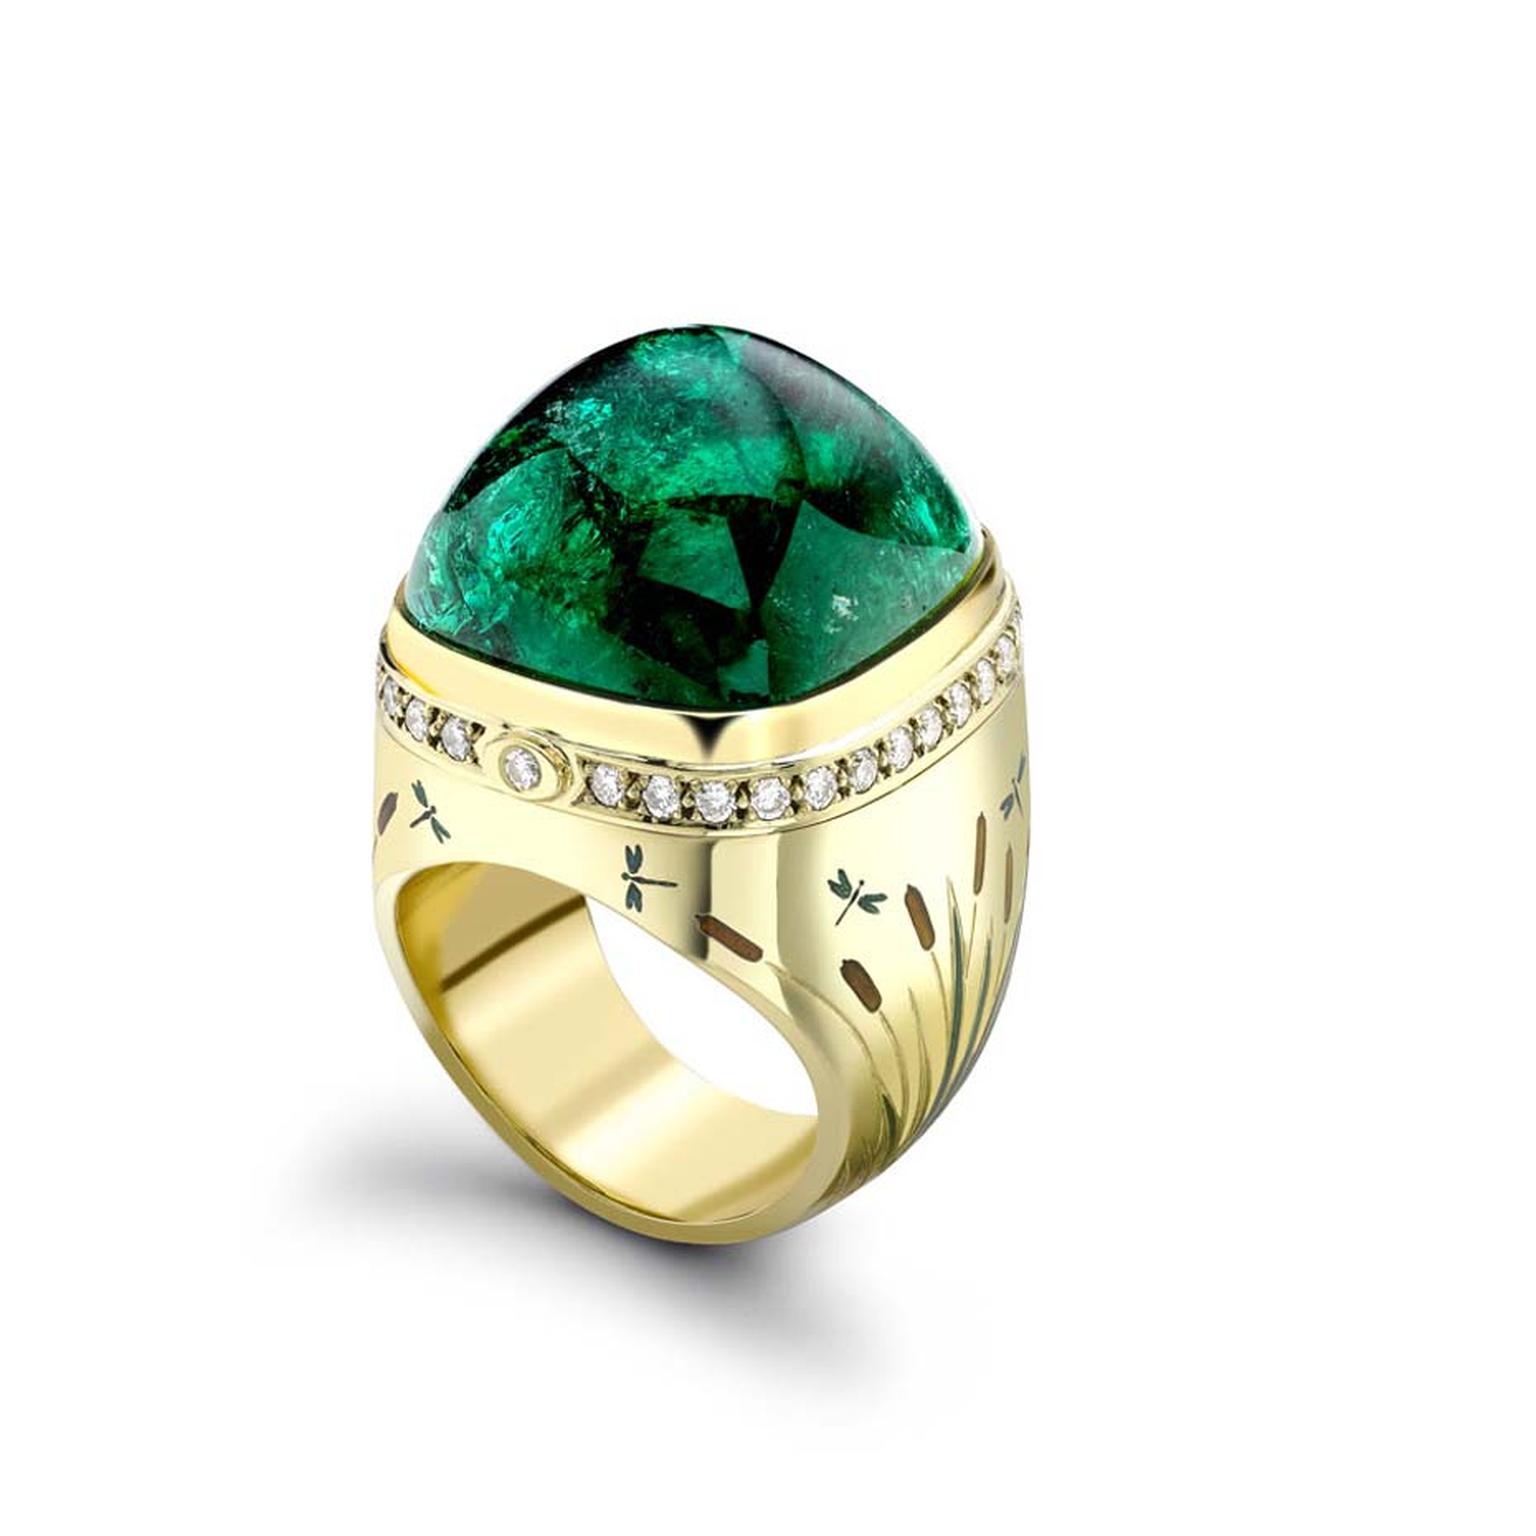 Theo Fennell yellow gold Kissing Frogs ring with a 42.66ct emerald from Gemfields' mine in Zambia.